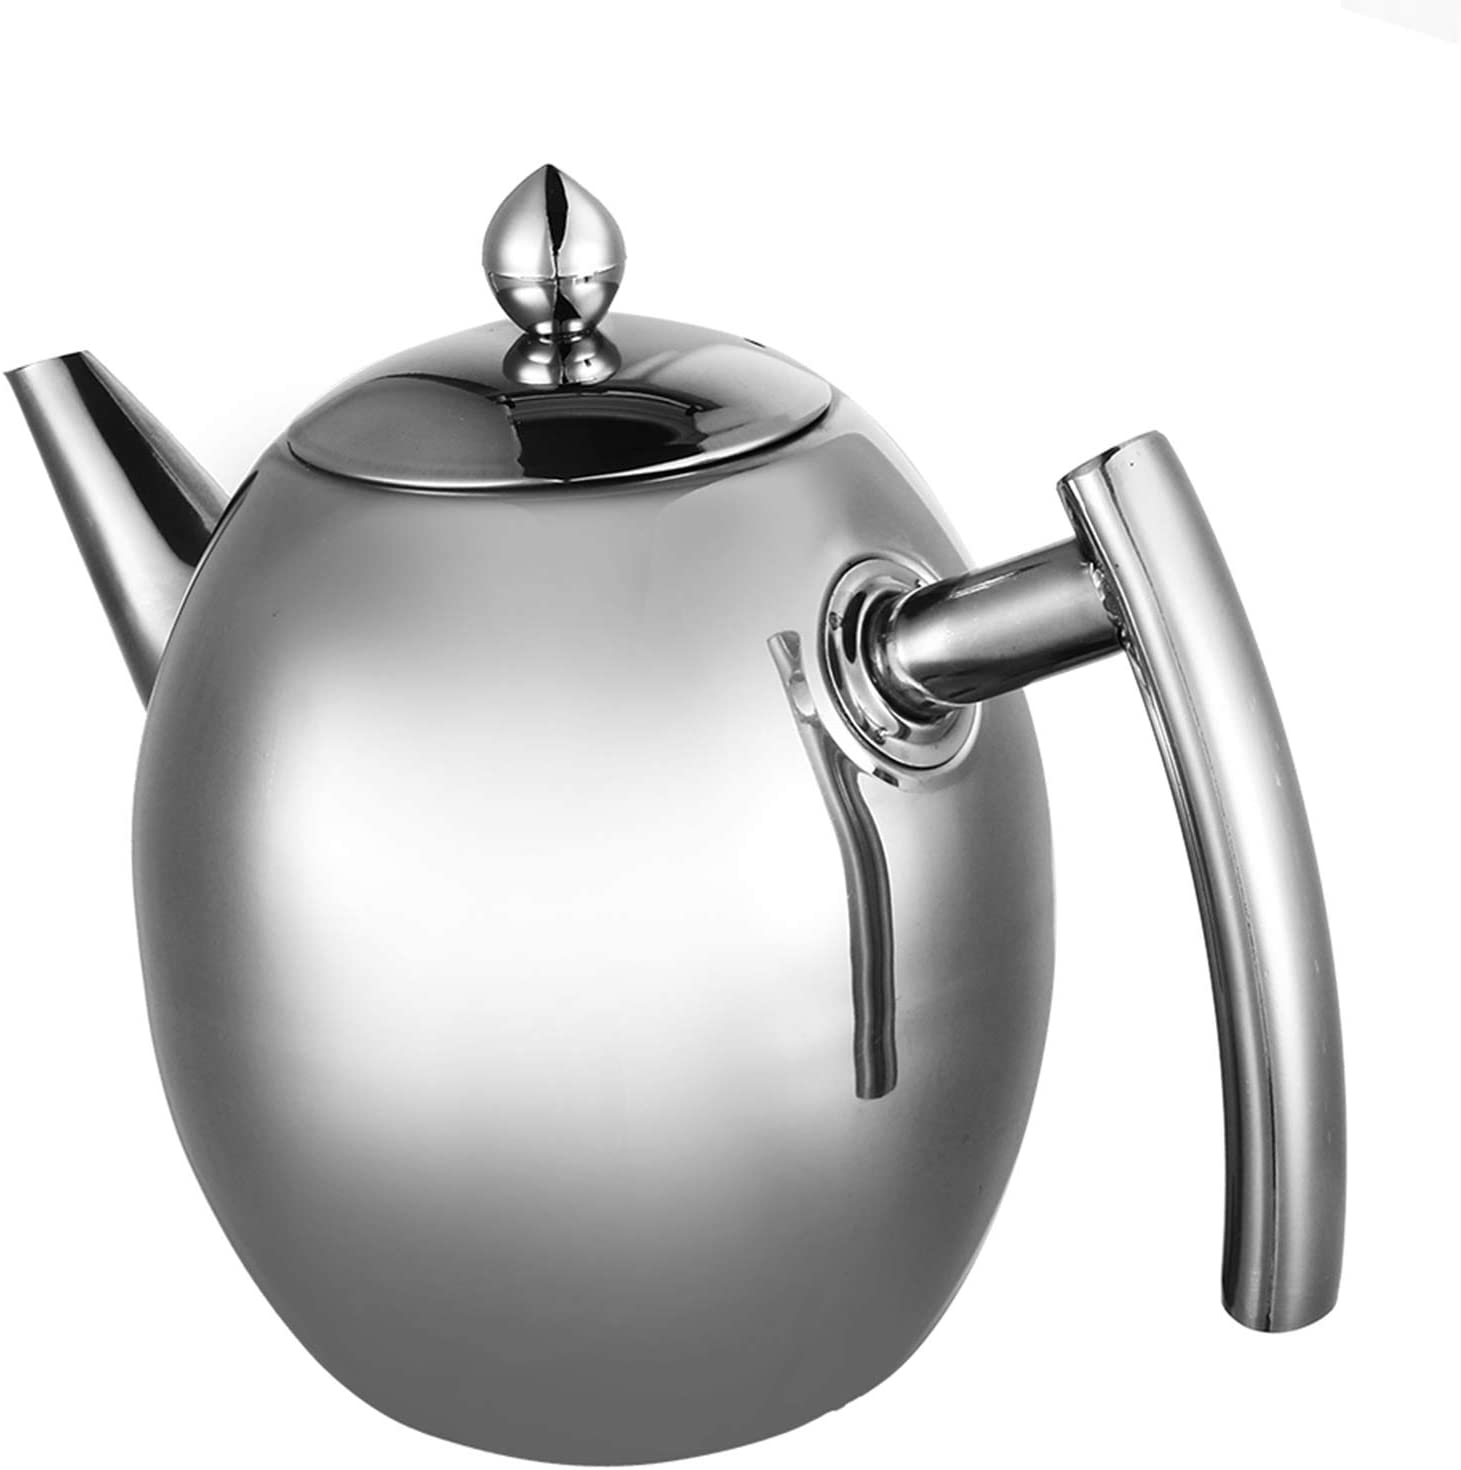 Garsent Teapot with Strainer, 1000 ml Stainless Steel Small Coffee Teapot with Tea Strainer with Steam Outlet for Home/Hotel/Cafes/Bars/Restaurants